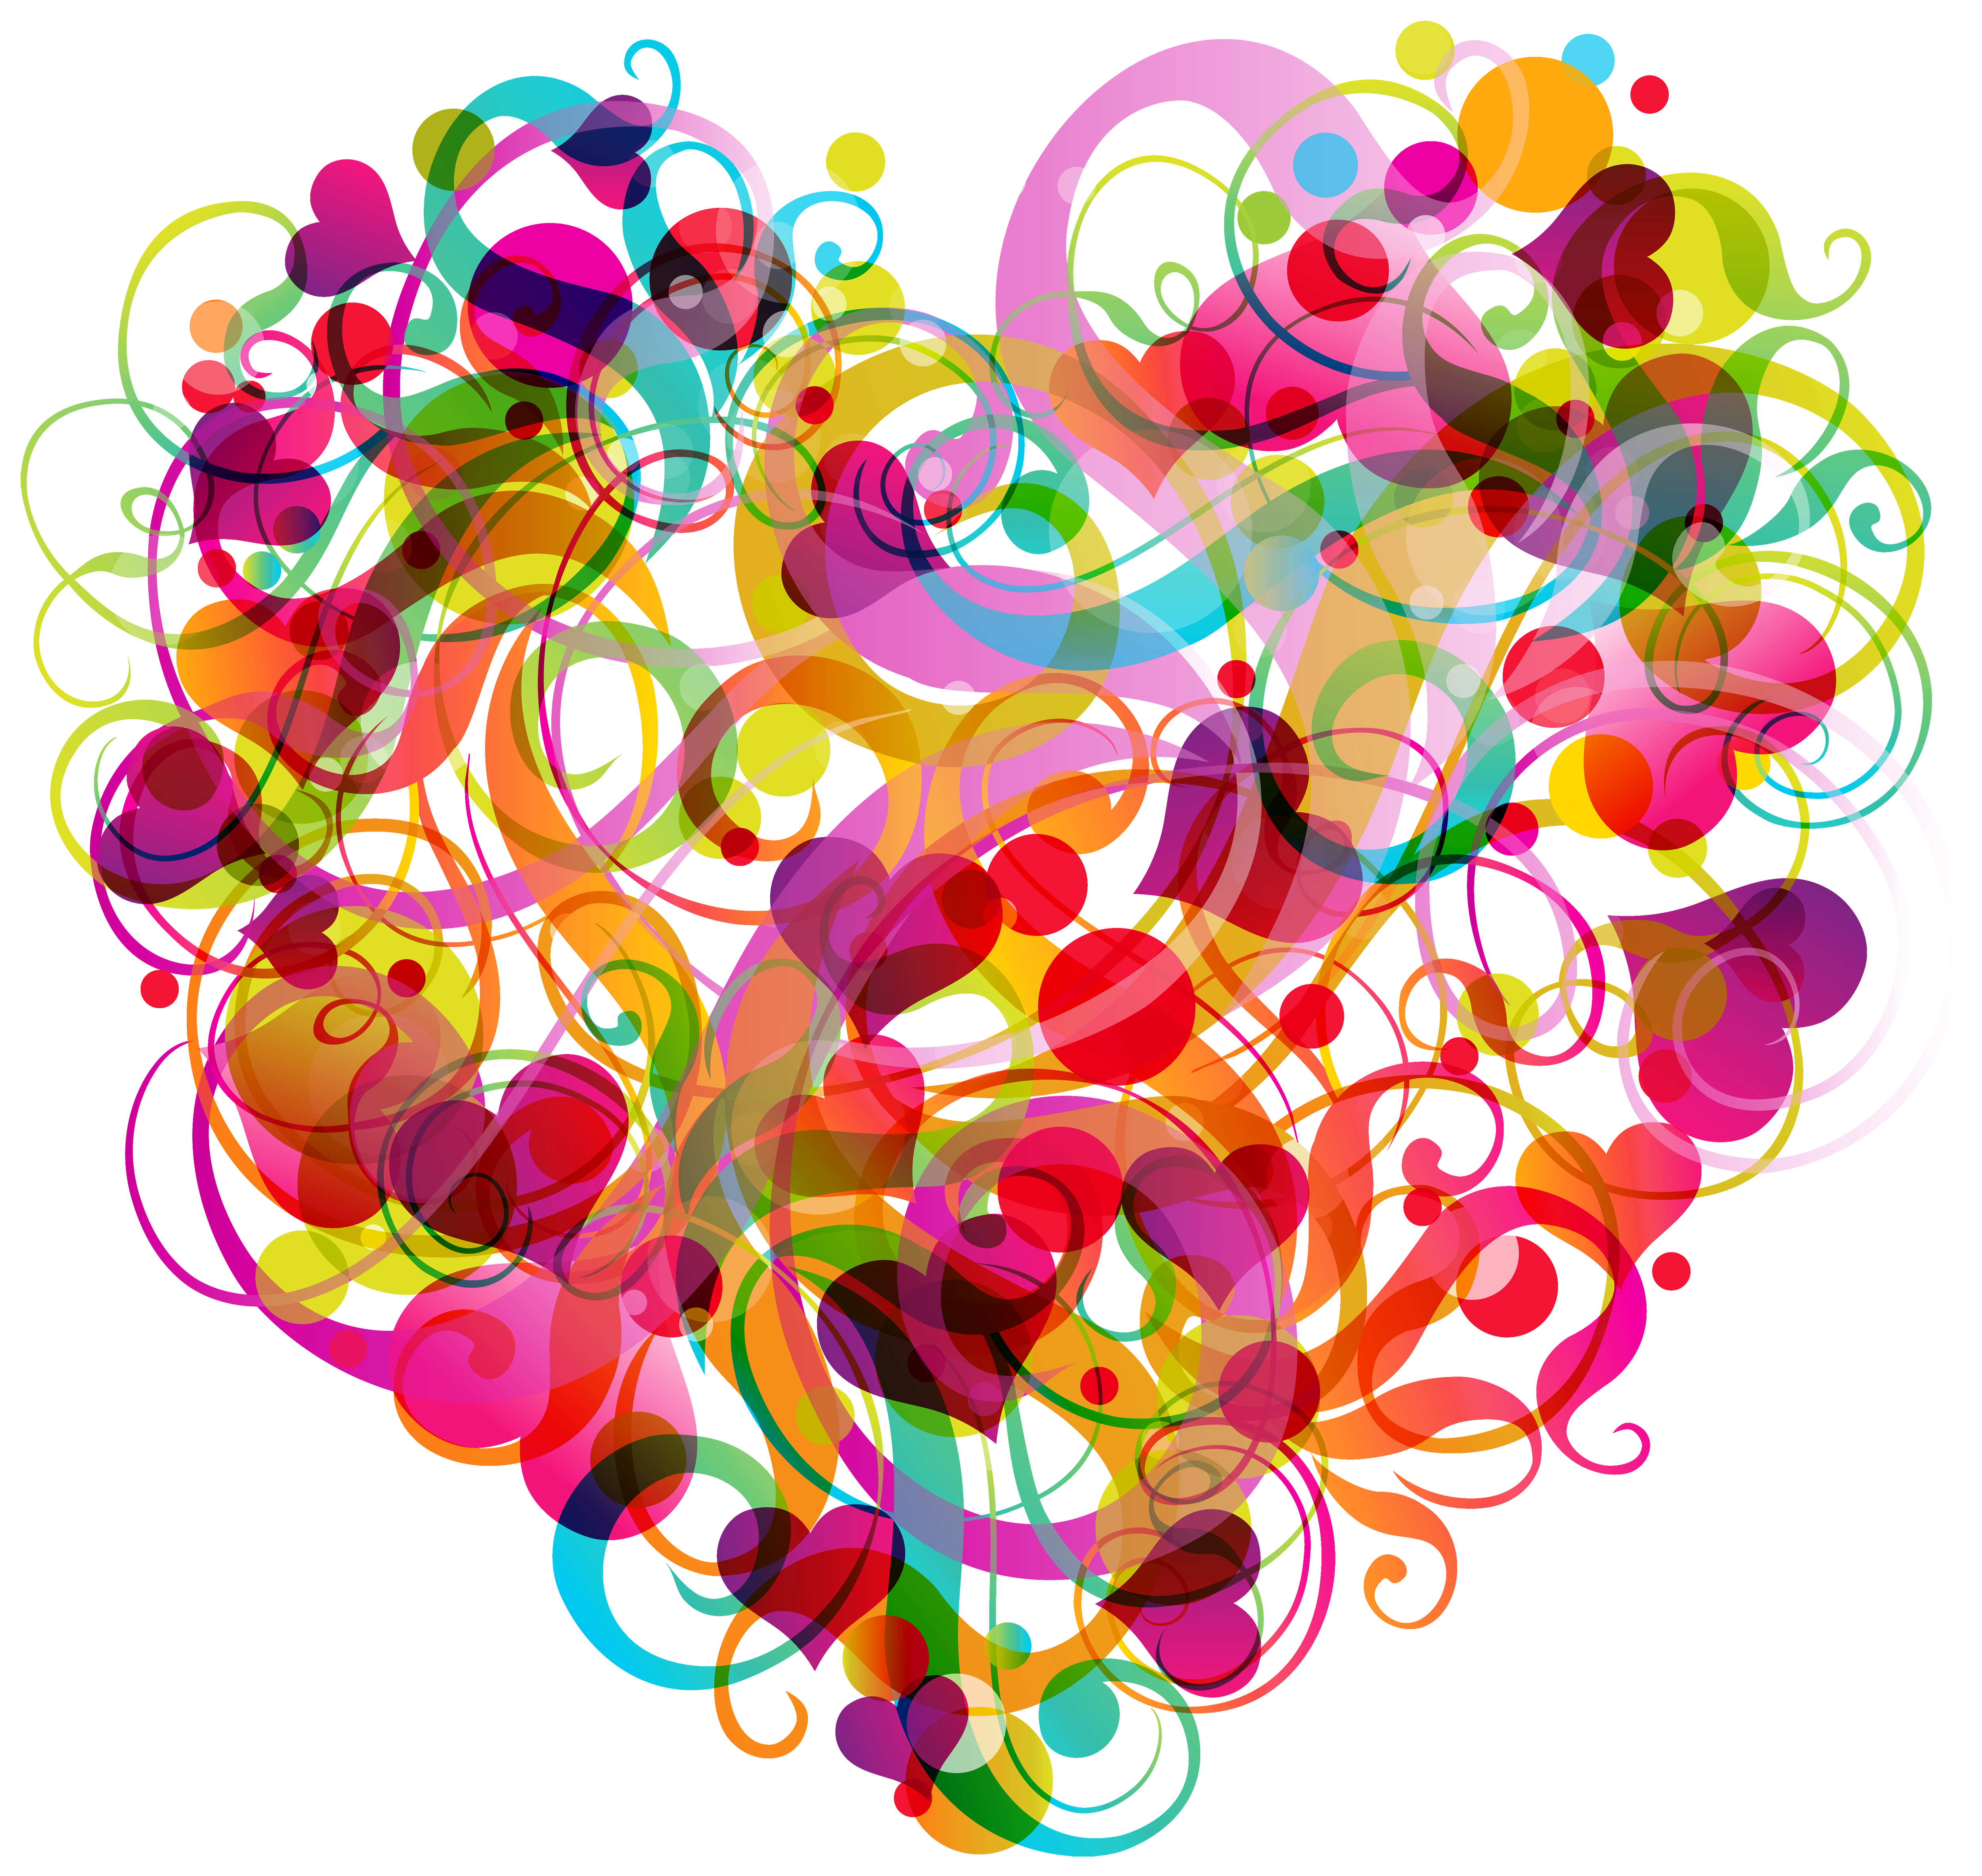 Abstract colorful png best. Jewel clipart heart cut